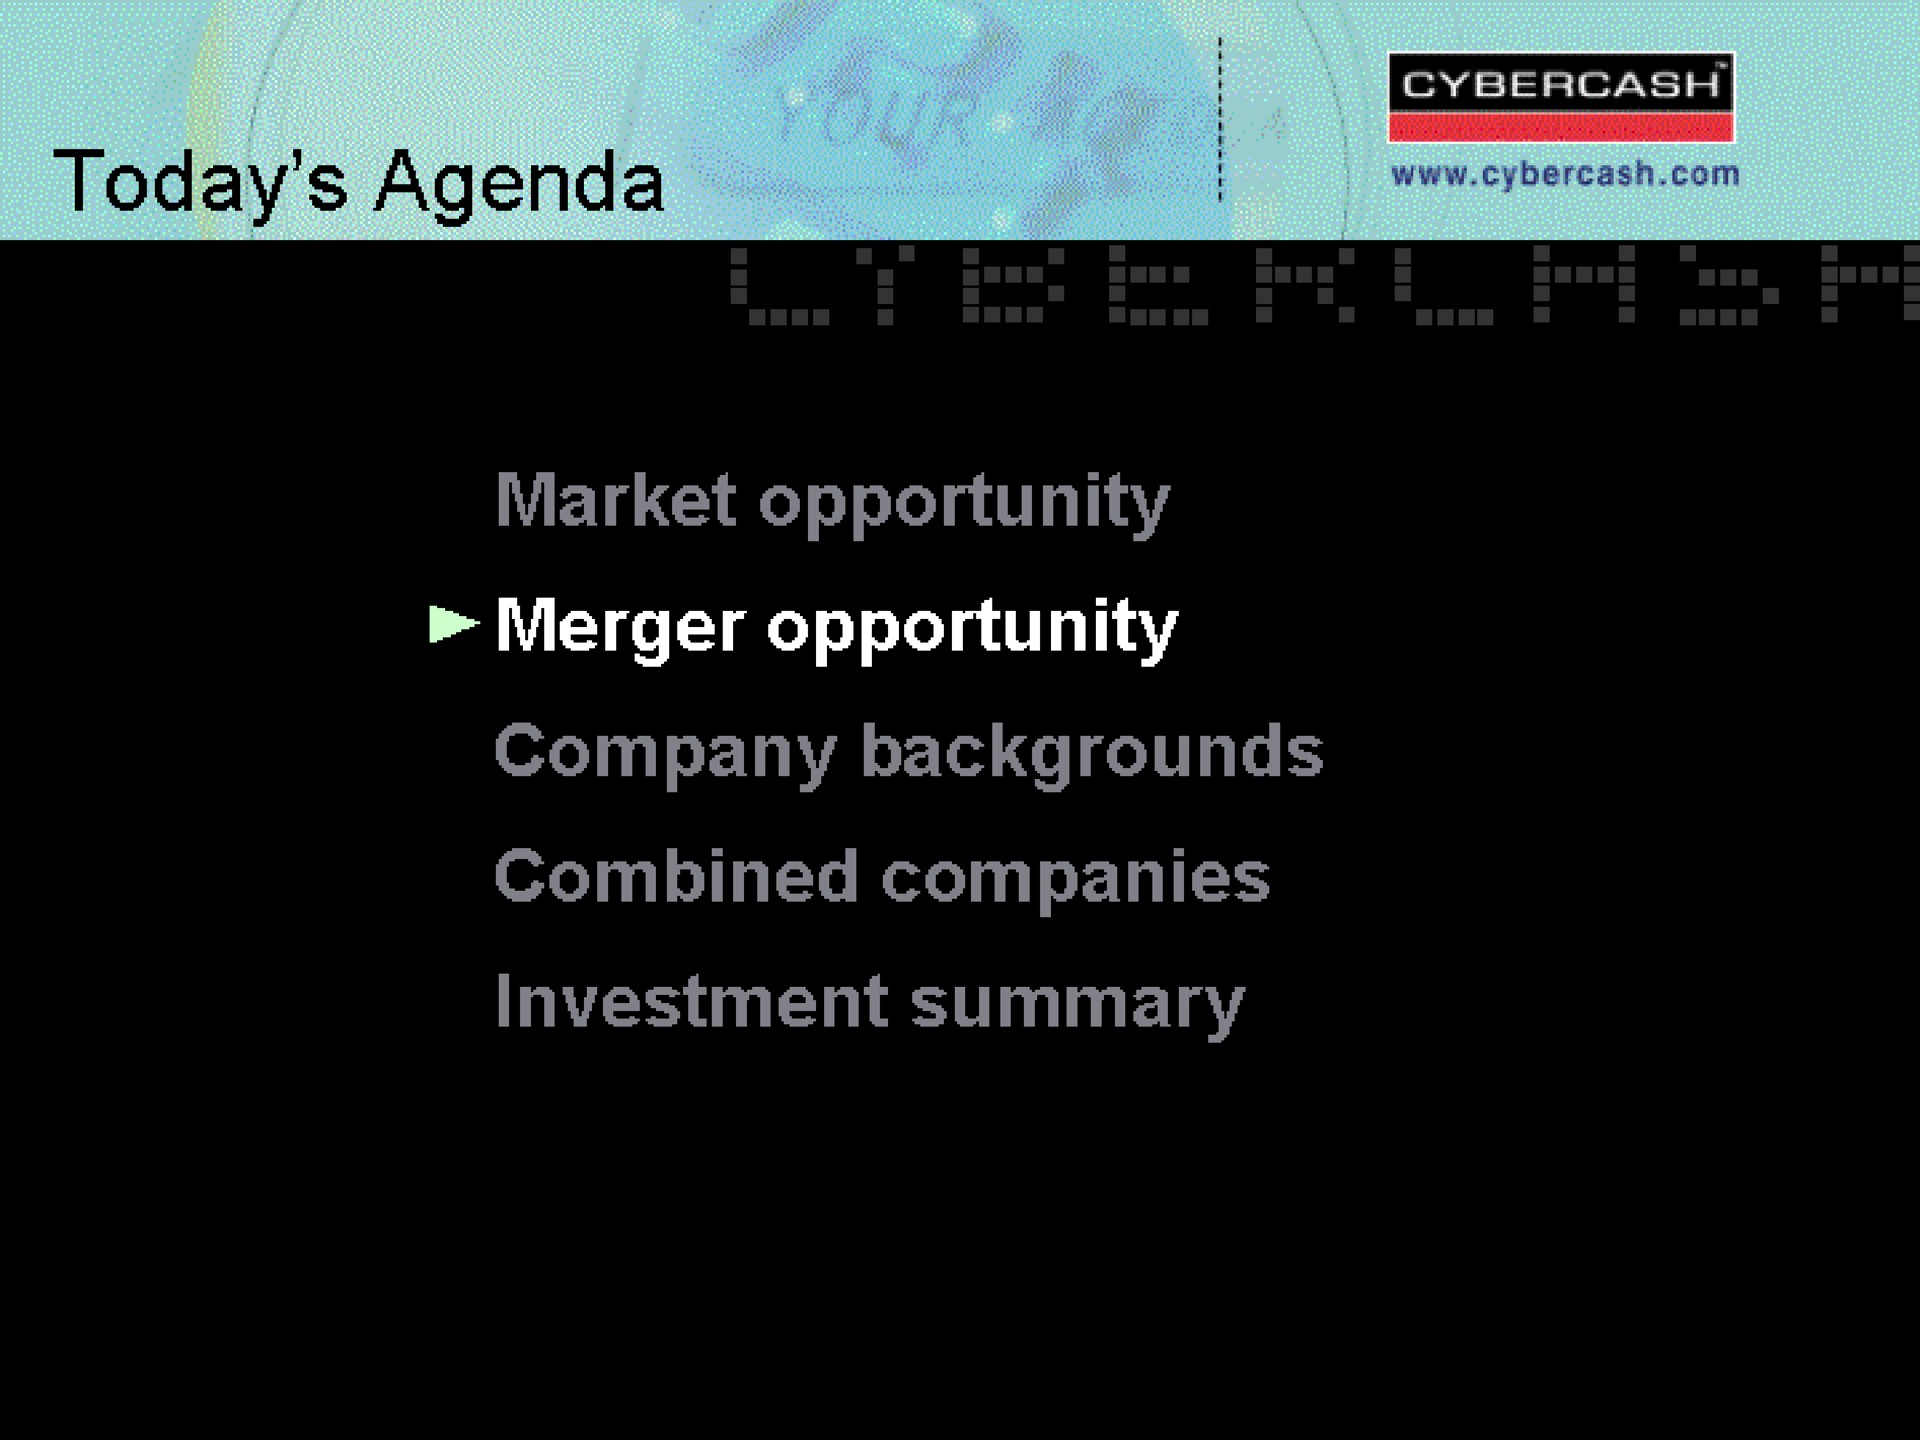 todays agenda market opportunity merger opportunity company backgrounds combined companies investment summary | CyberCash